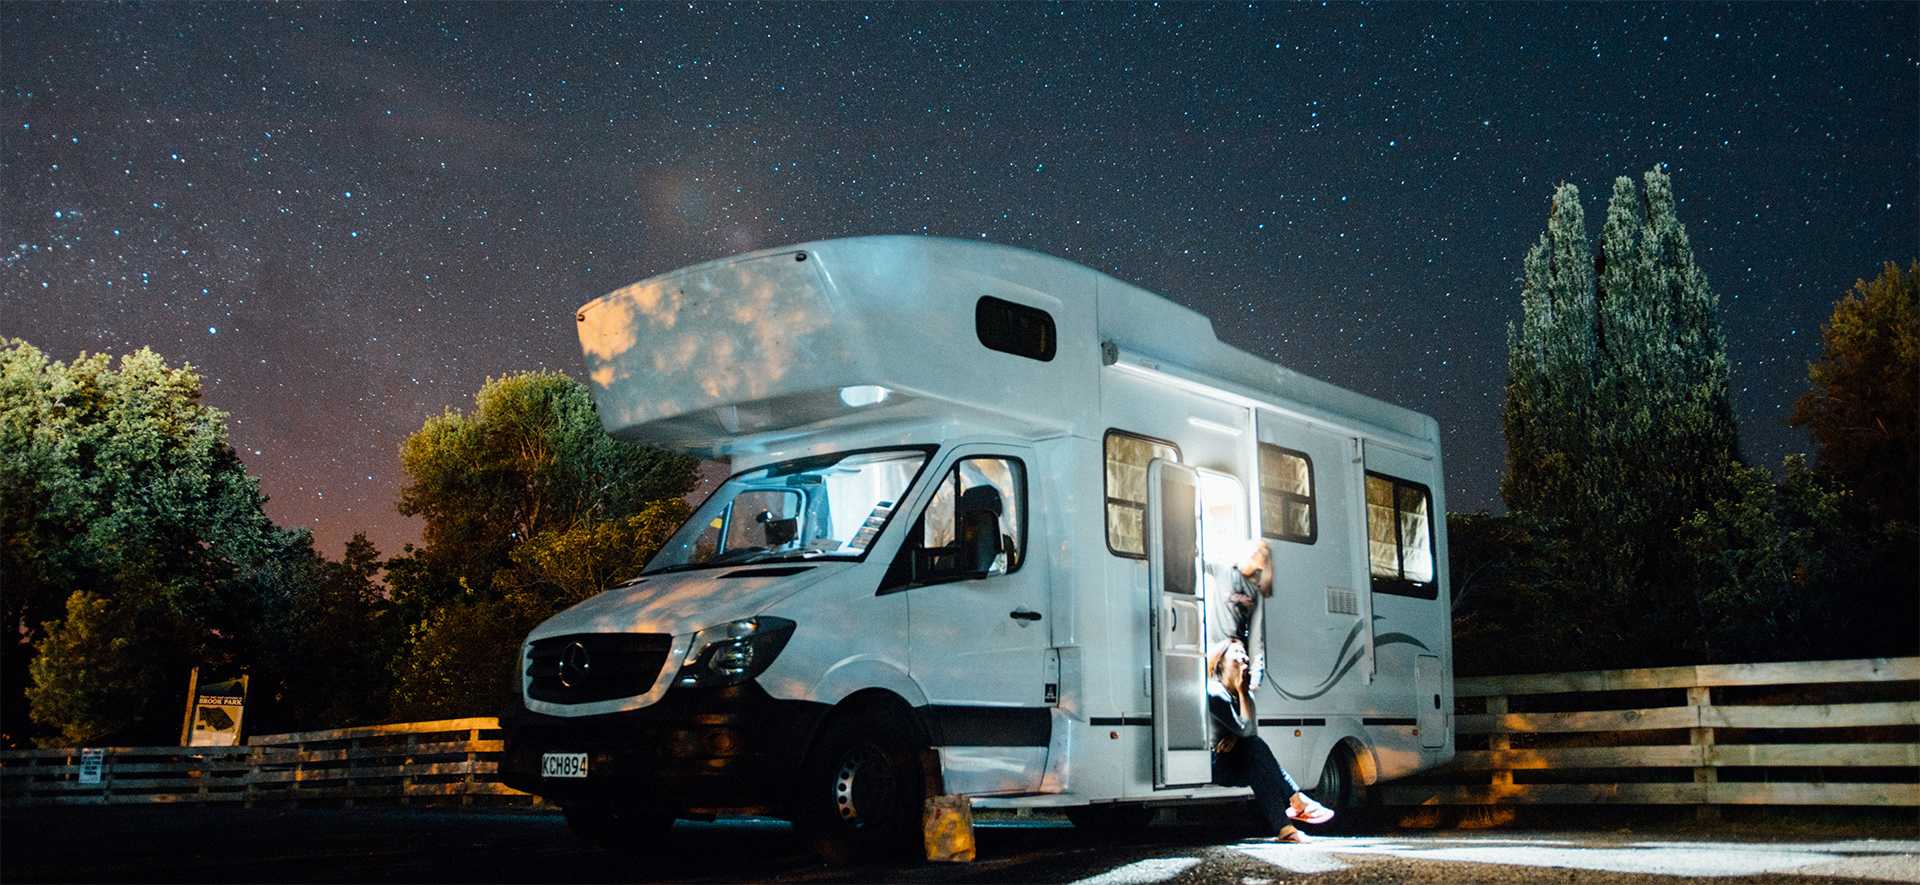 camper van under a night sky filled with stars